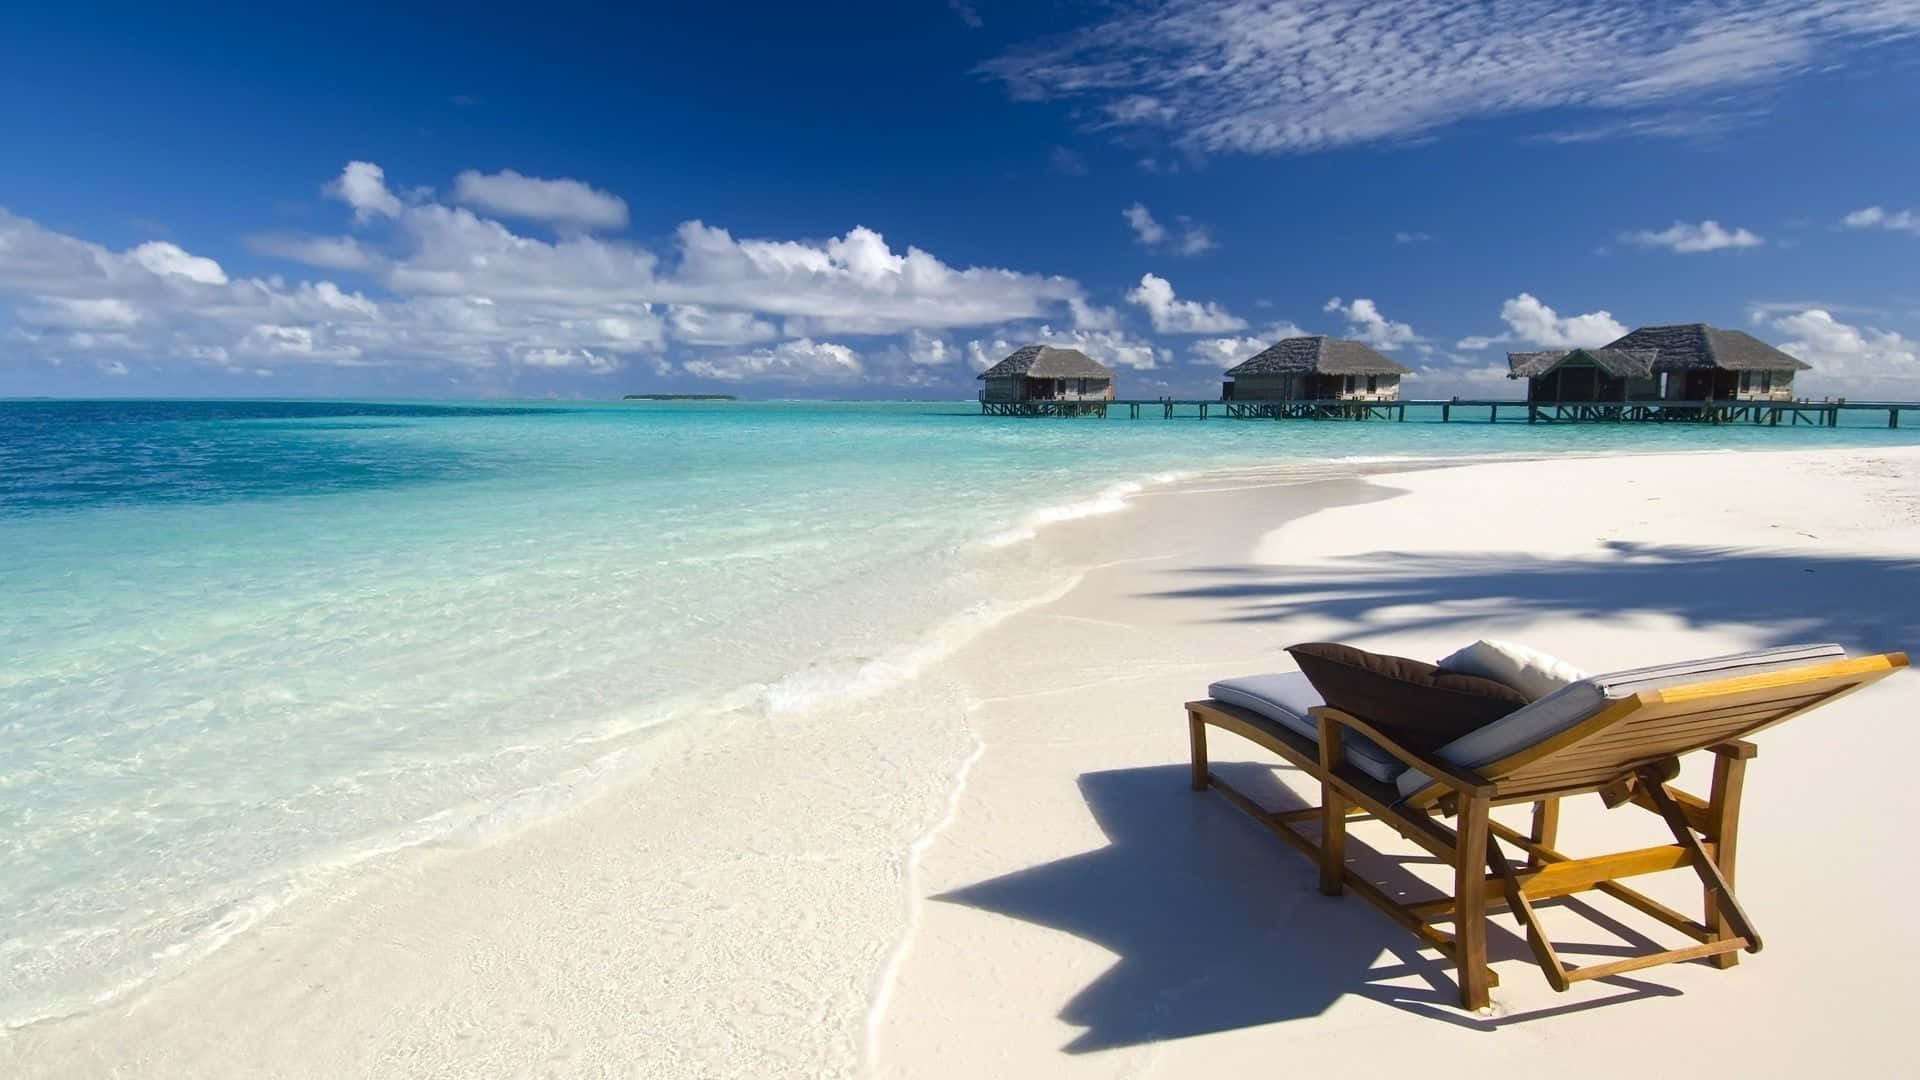 A Lounge Chair On A Beach With A Hut In The Background Wallpaper